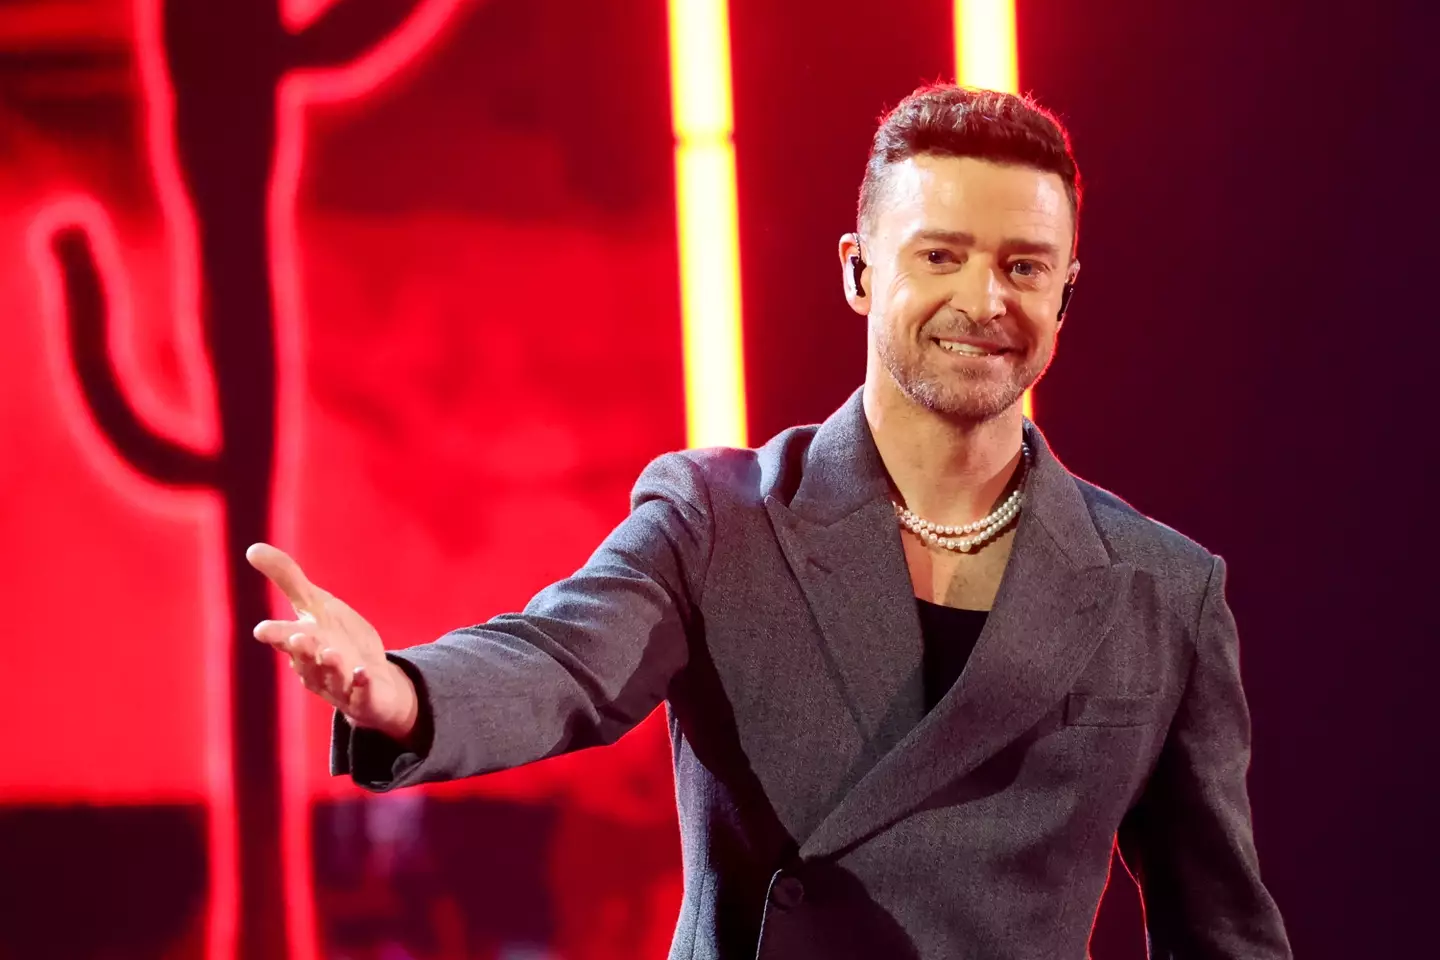 Justin Timberlake is currently touring. (Getty Images)